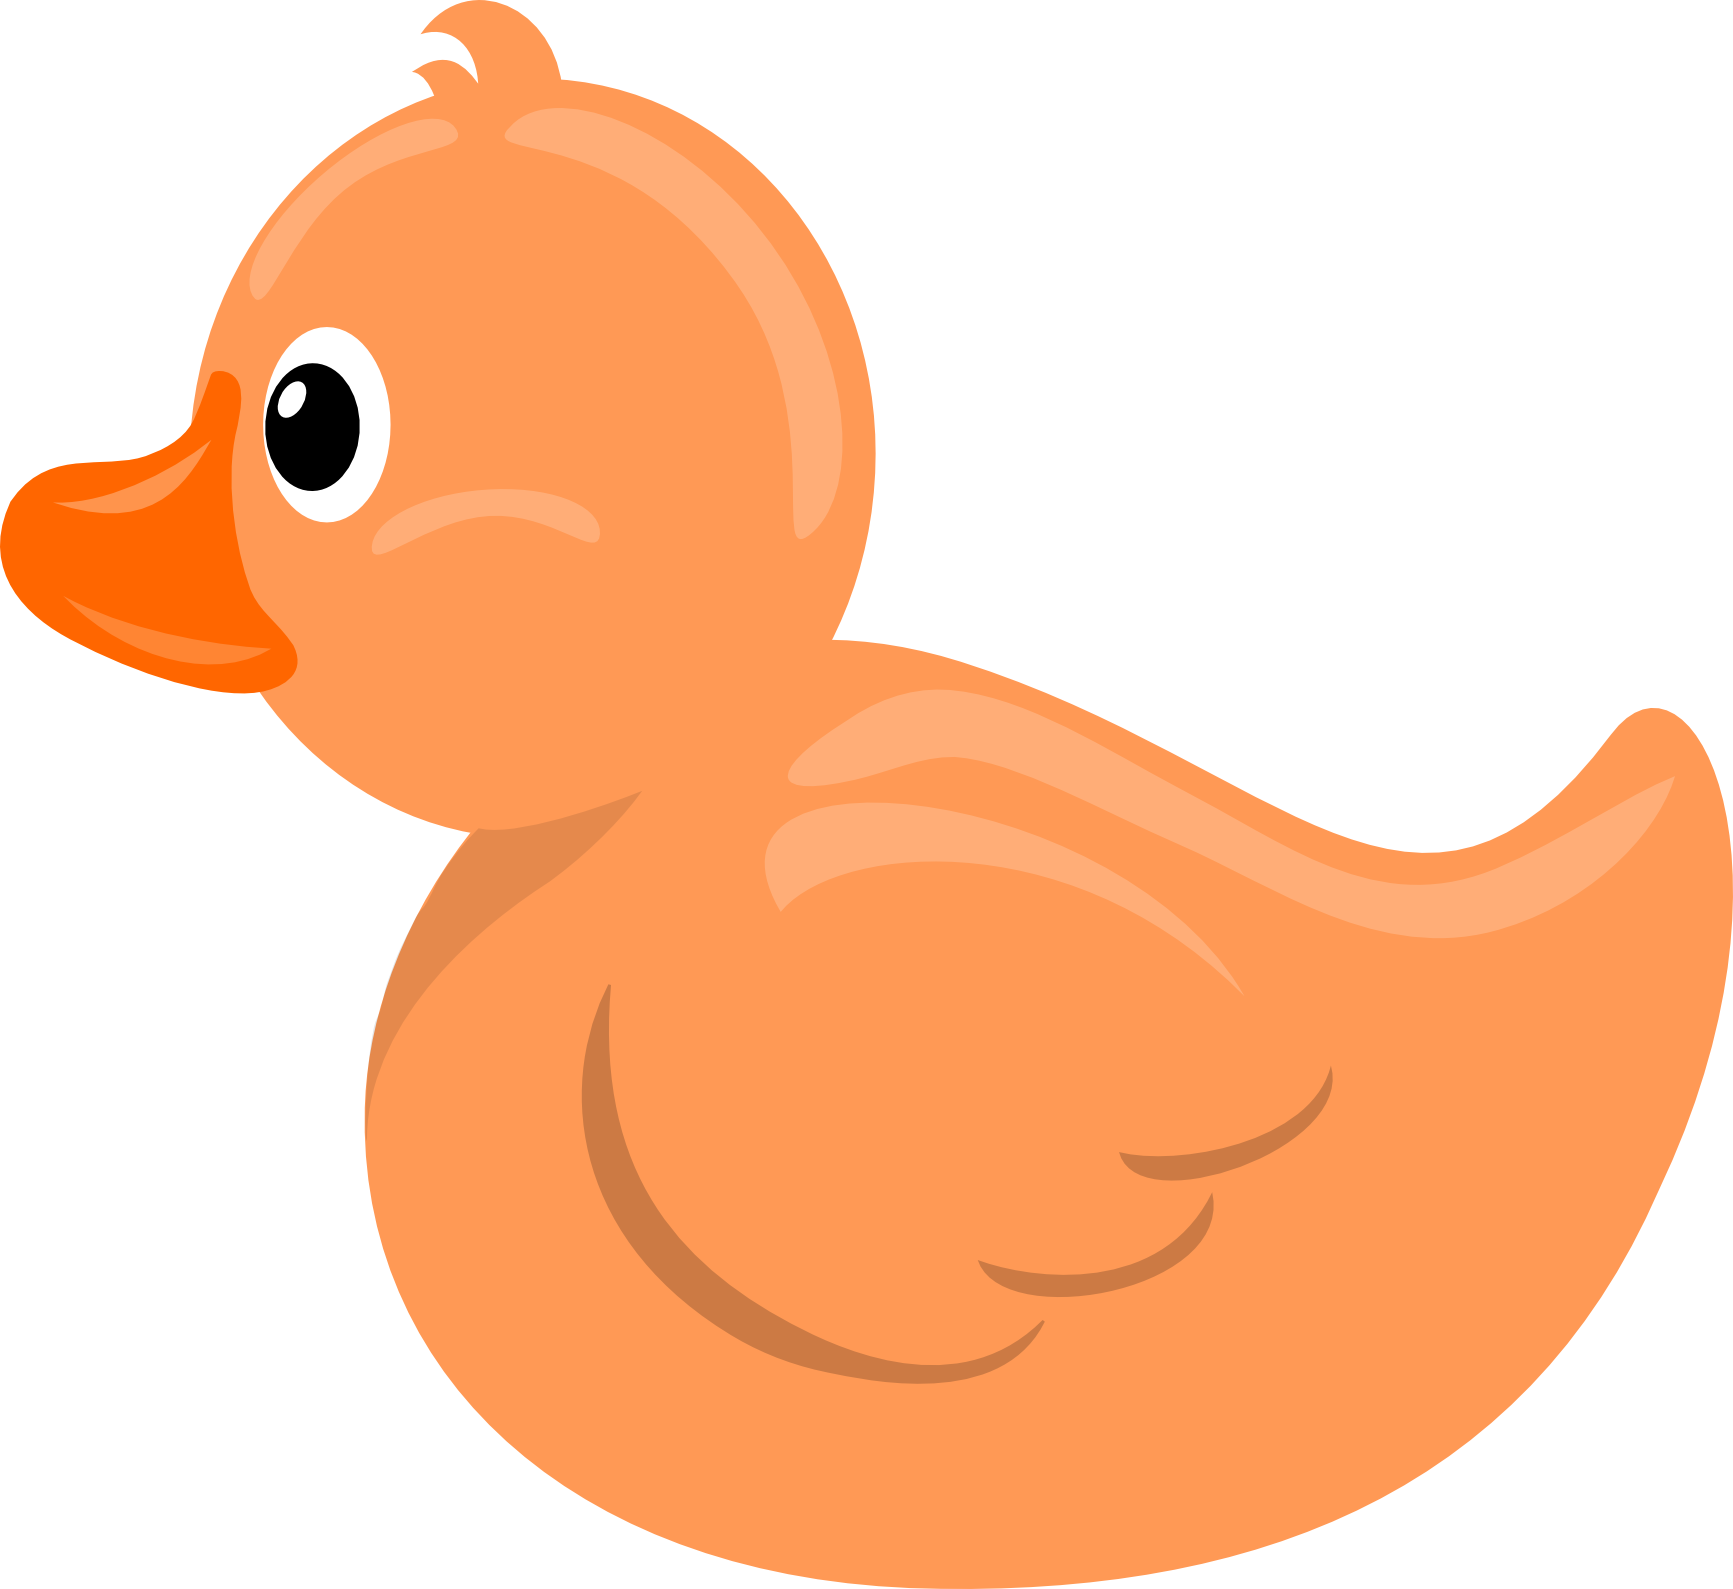 Clipart duck side view. At getdrawings com free